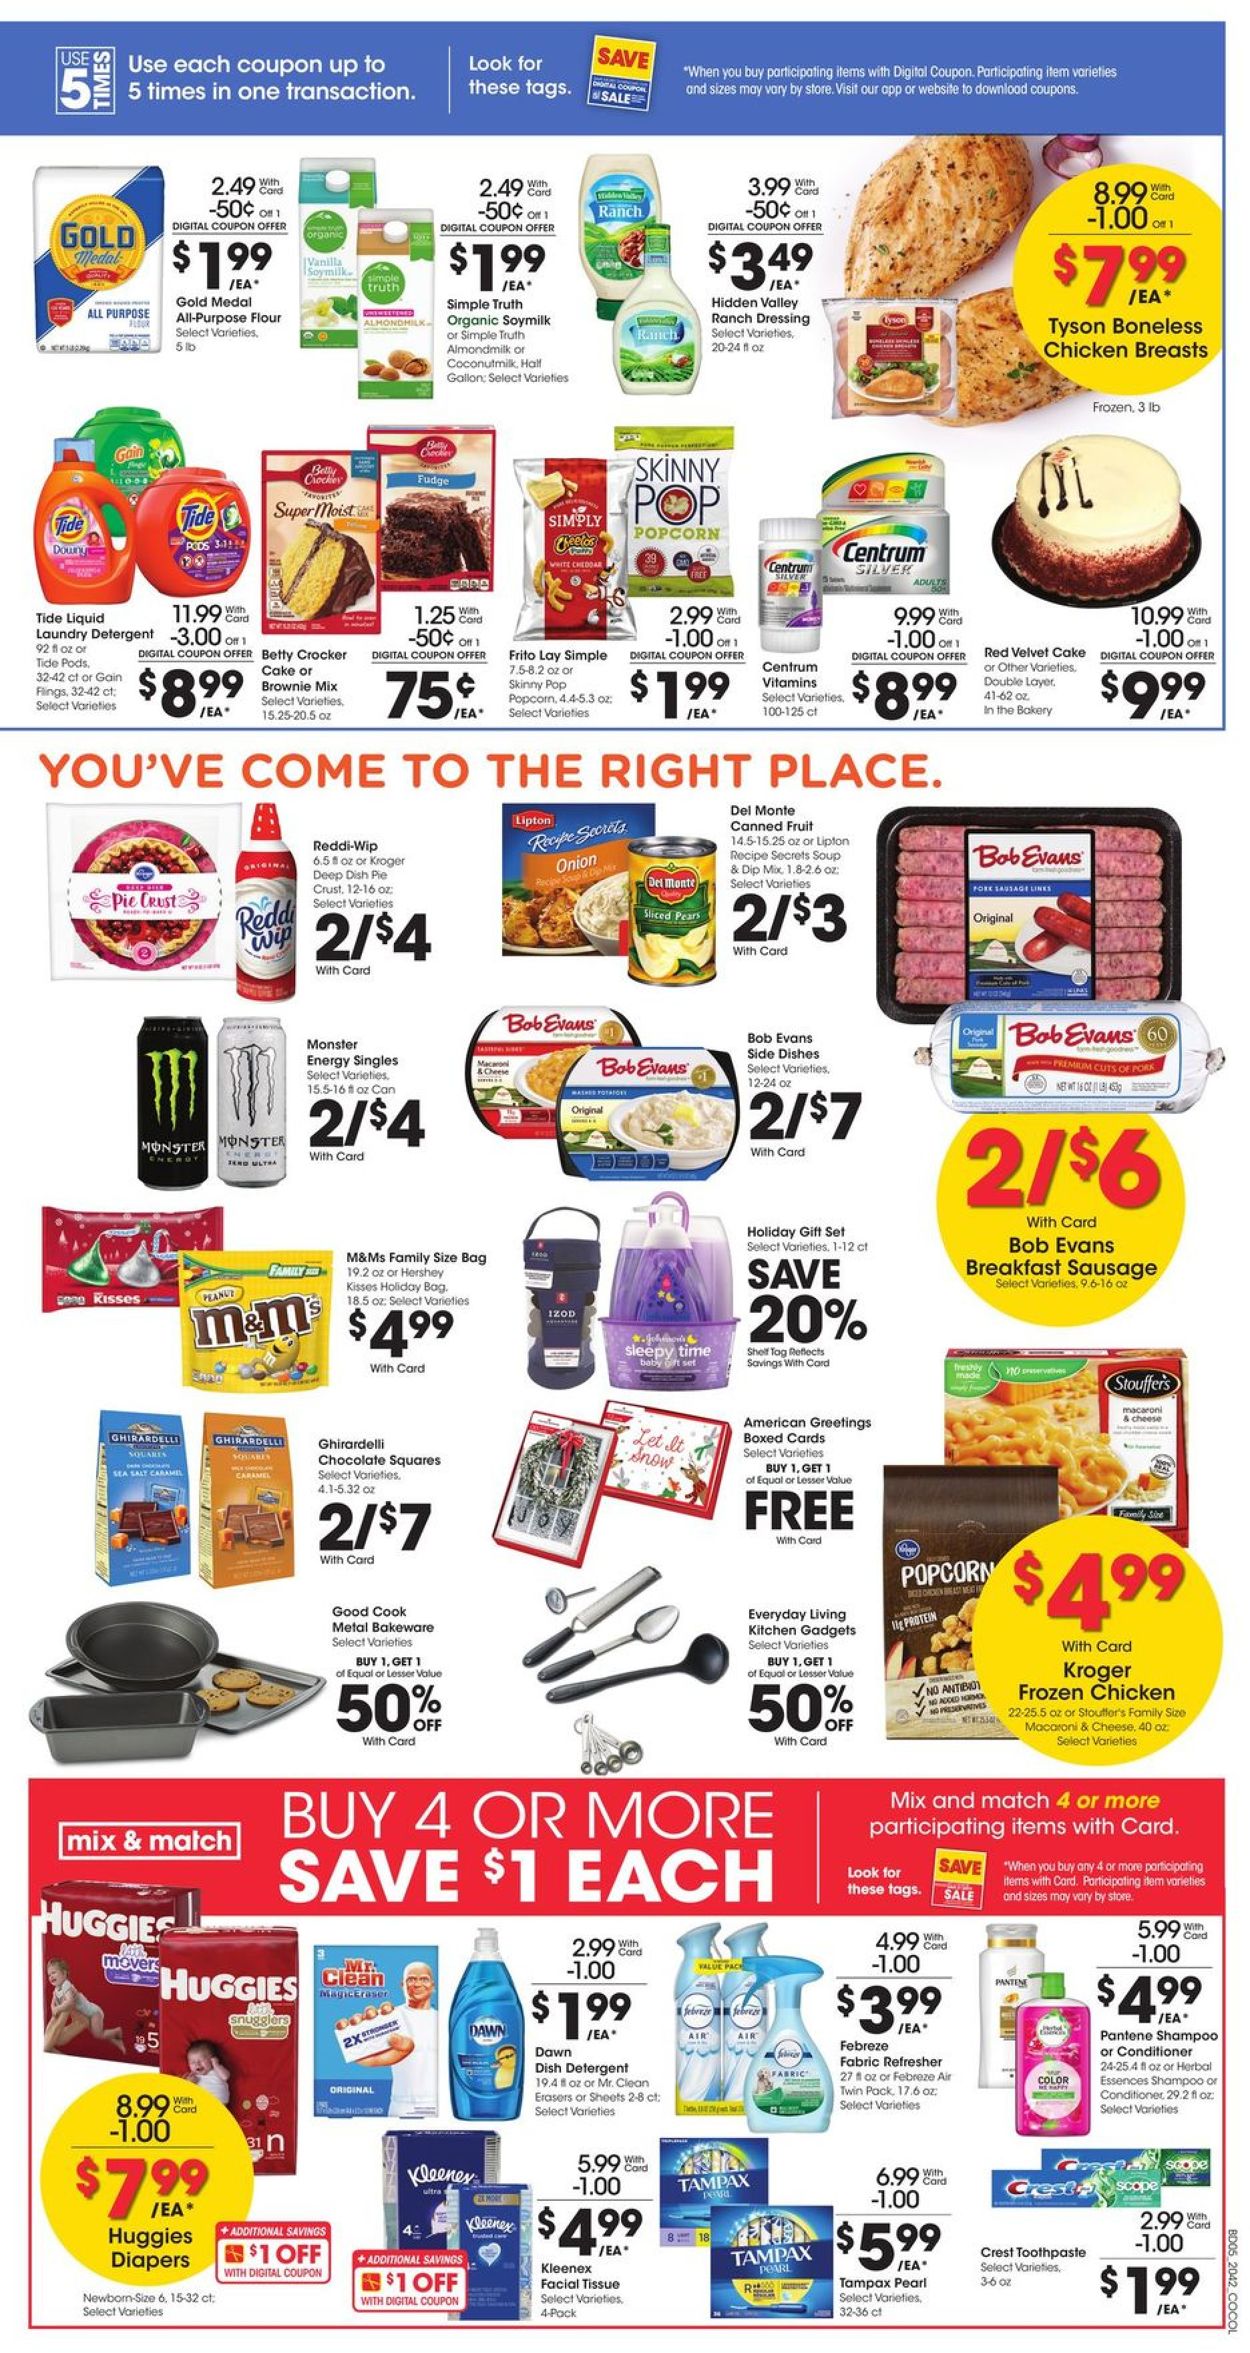 Kroger Ad from 11/18/2020